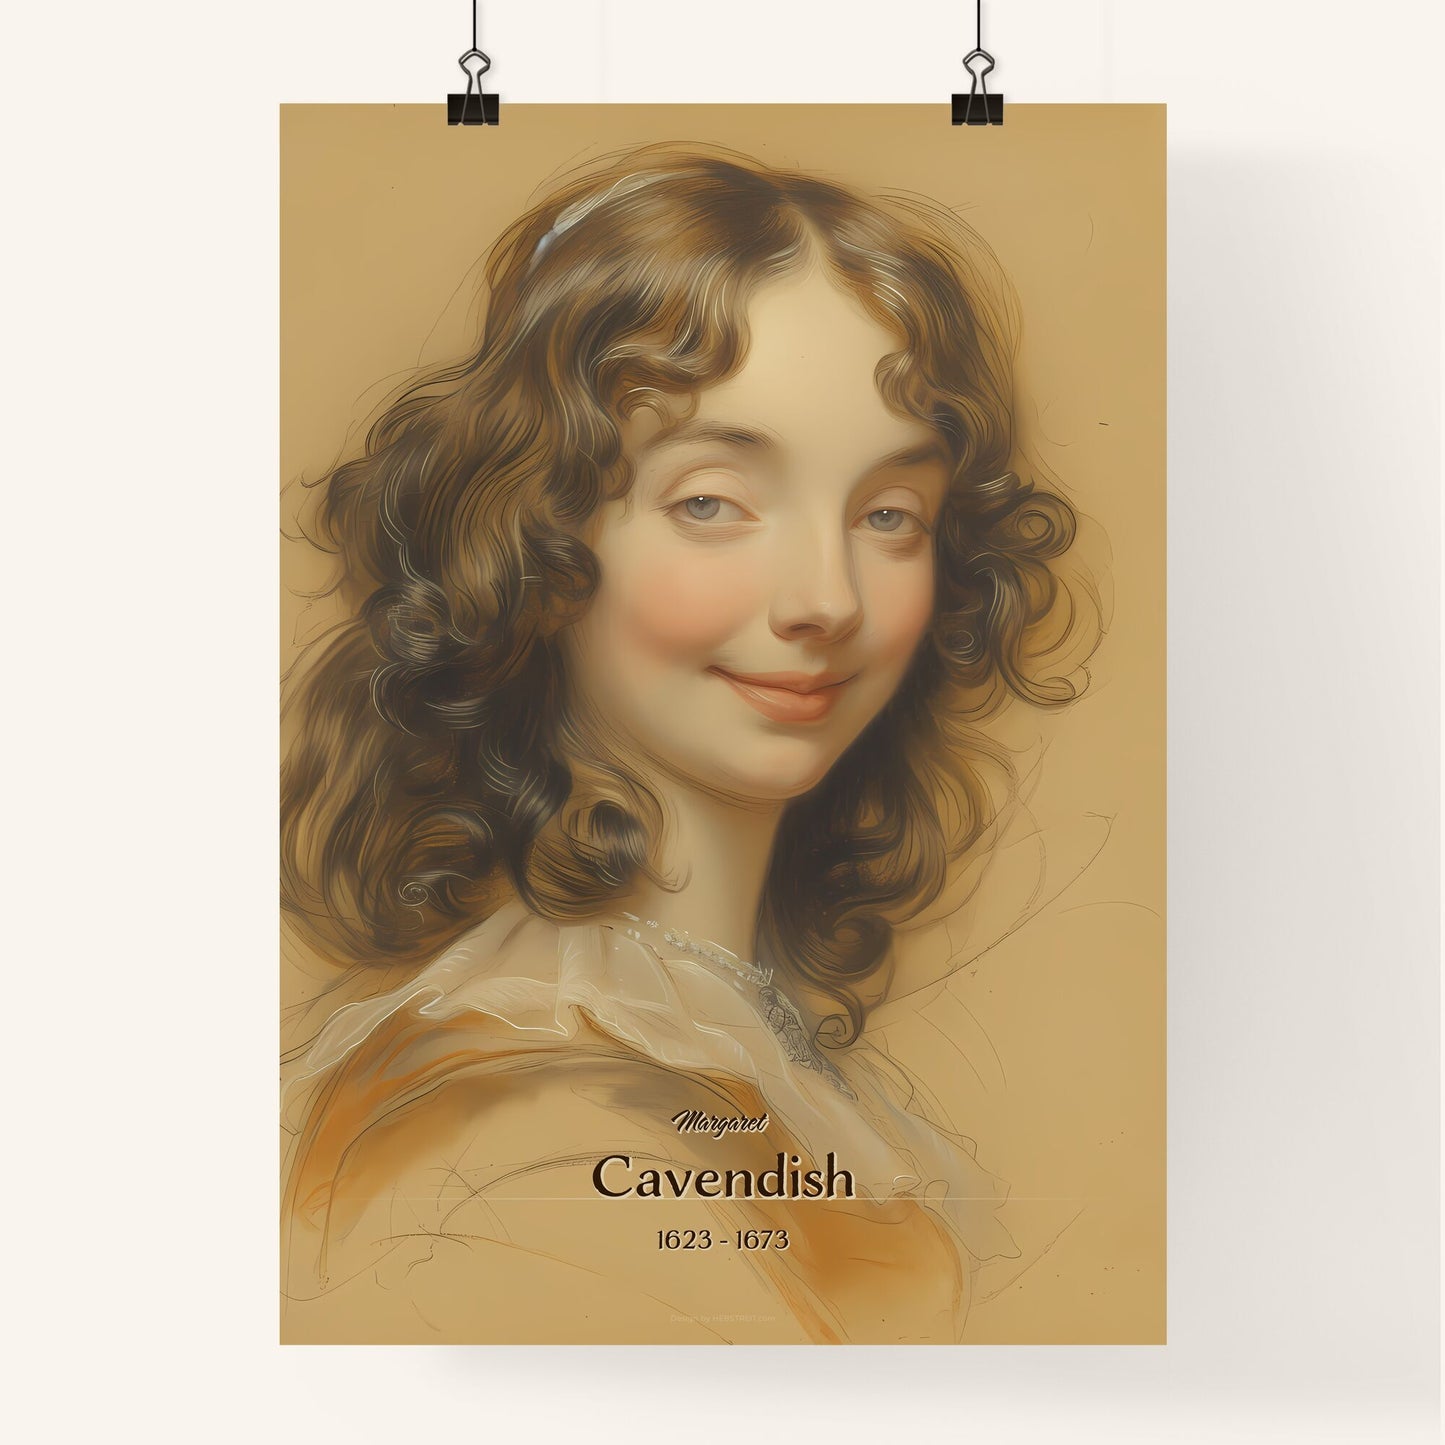 Margaret, Cavendish, 1623 - 1673, A Poster of a painting of a woman Default Title